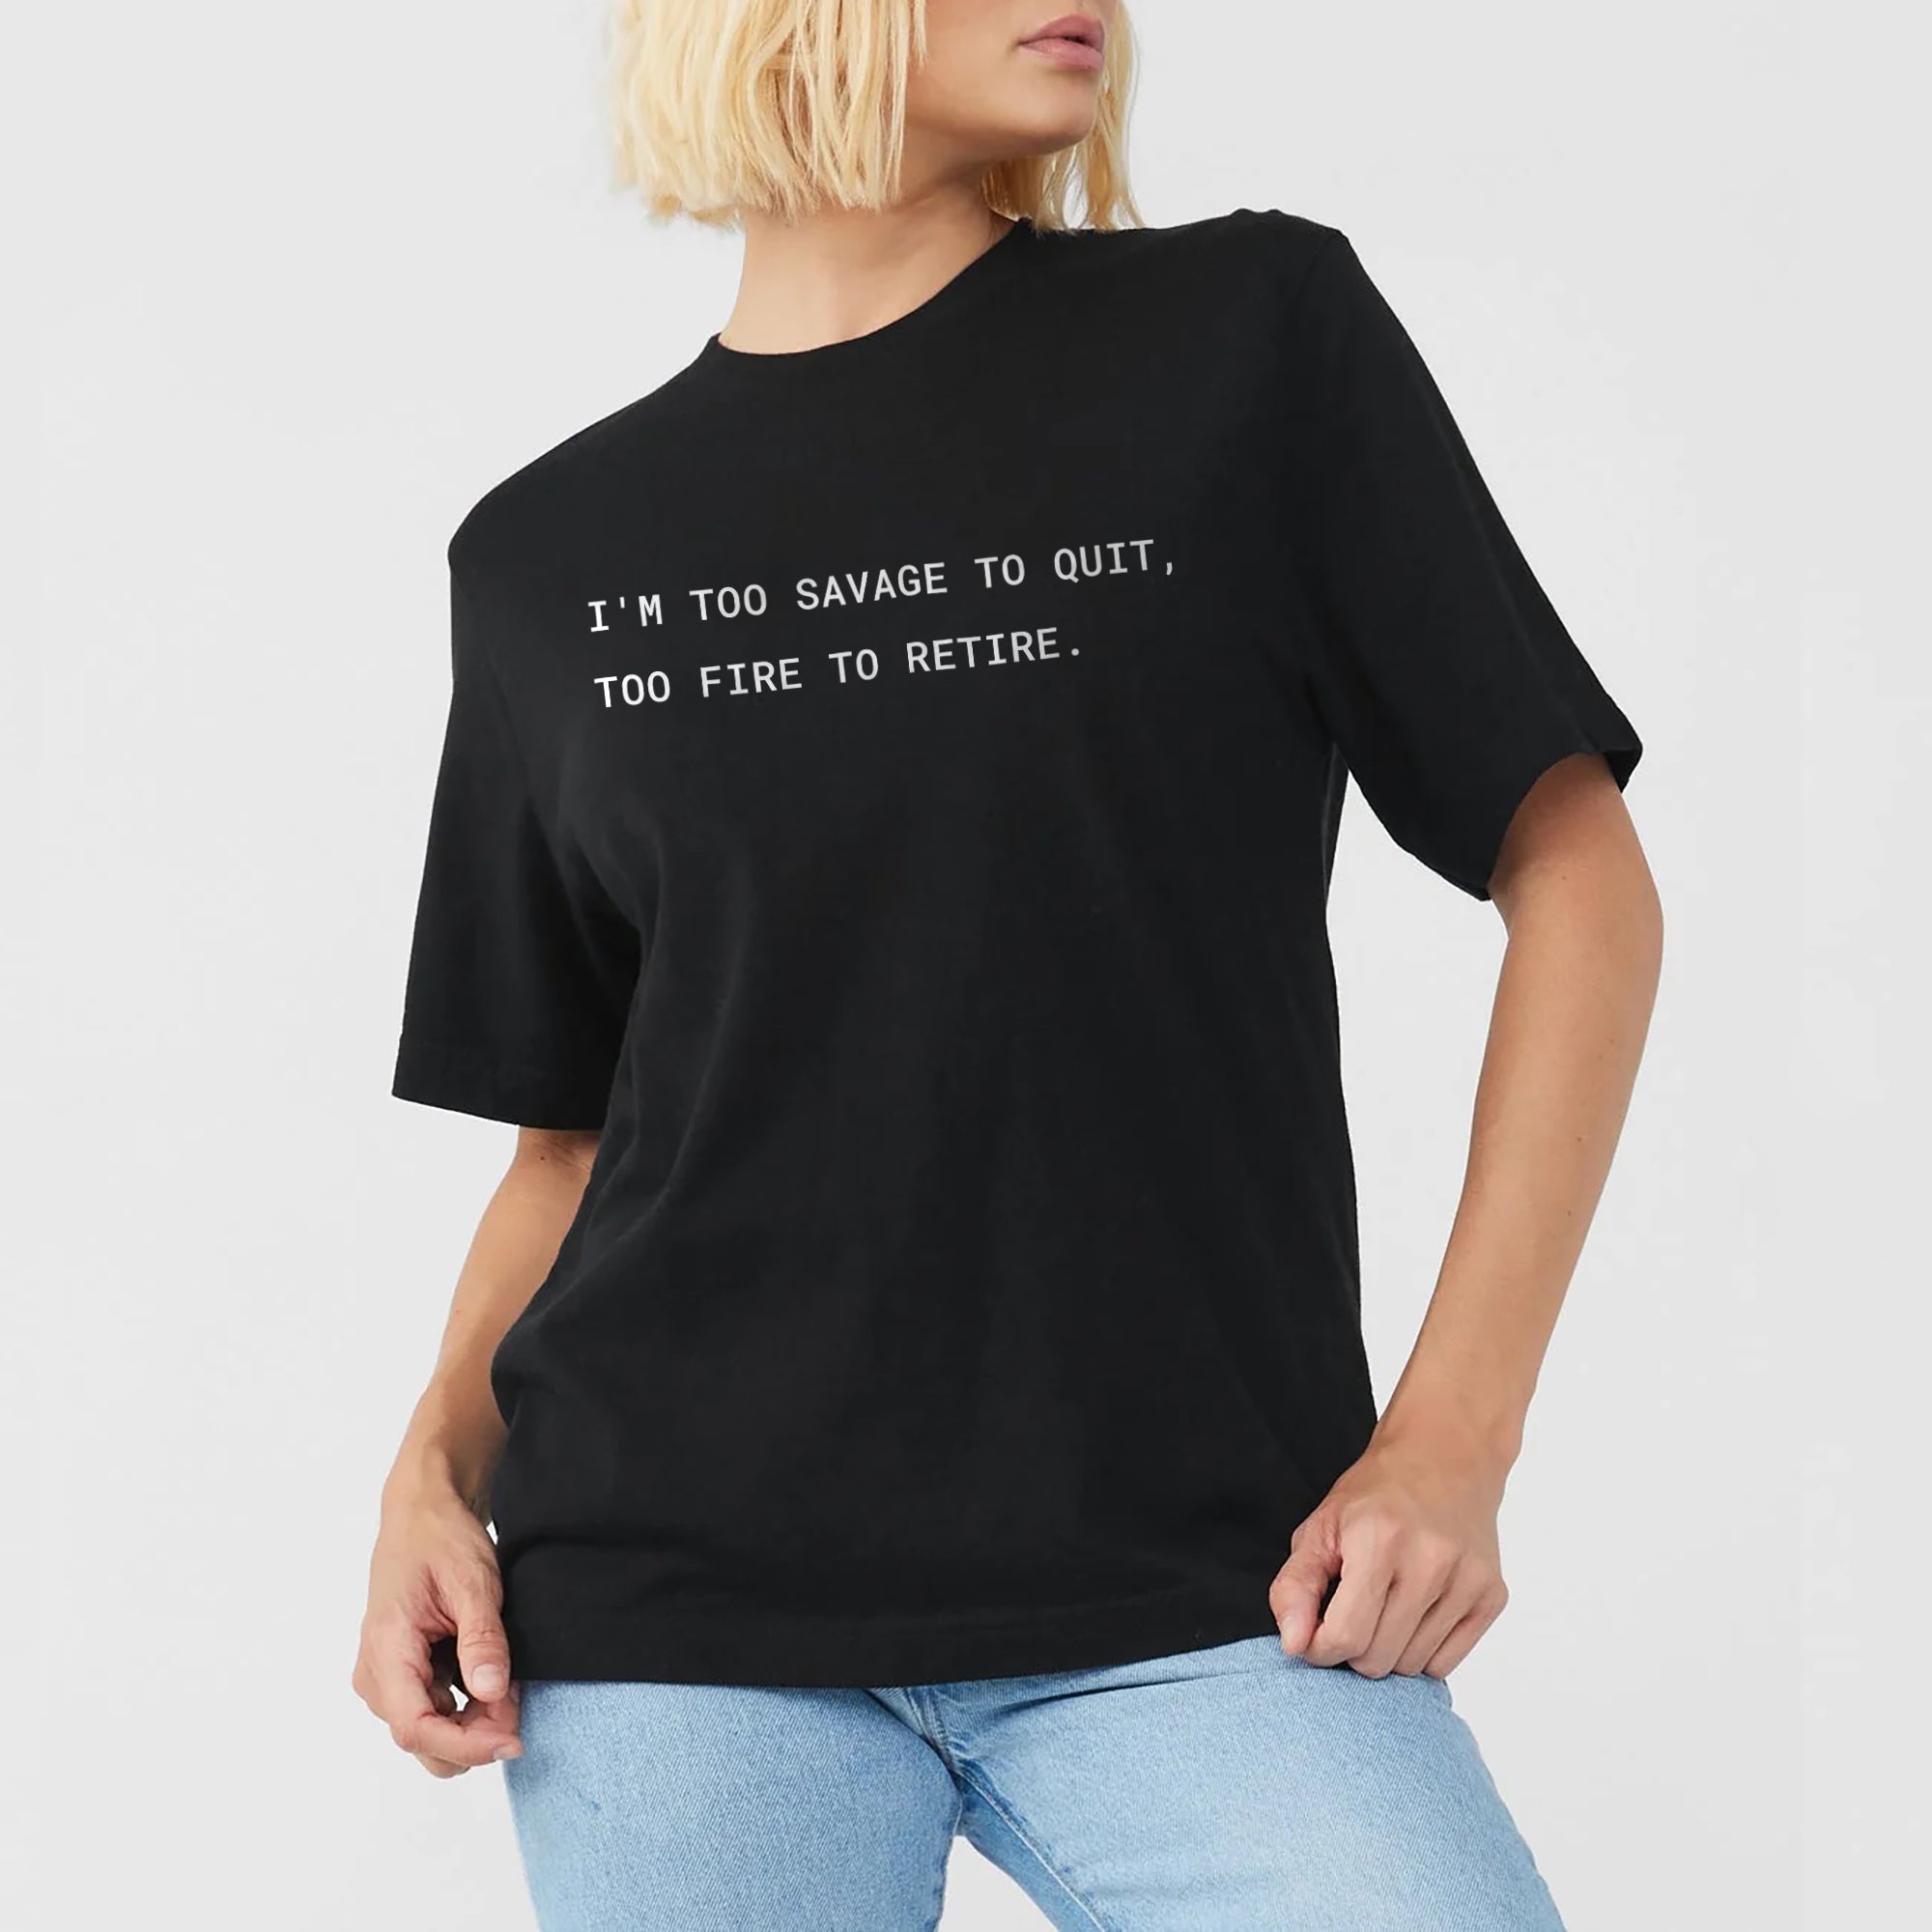 I'm Too Savage to Quit, Too Fire to Retire Boyfriend Crew Tee Solid Black Model Image